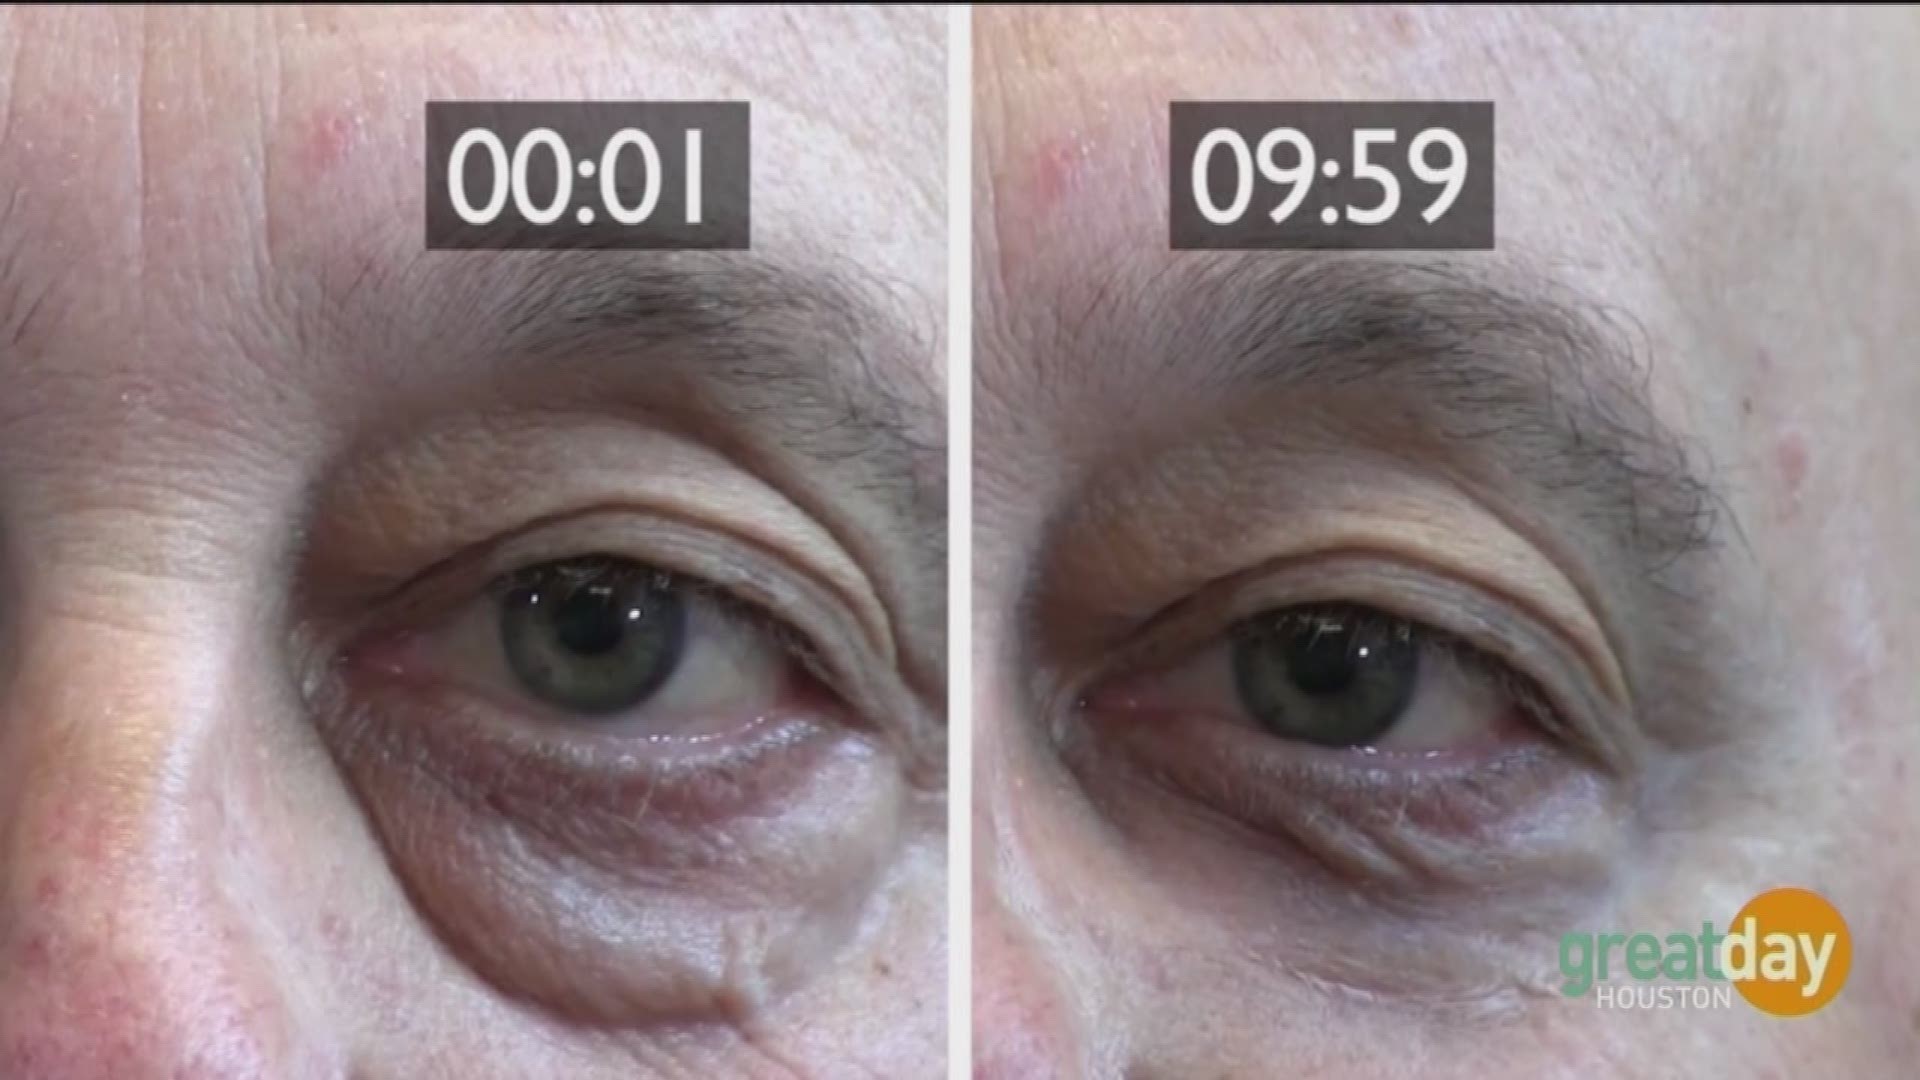 Plexaderm takes years off your face by making under eye bags and age lines disappear in just minutes.  Amy Vanderoef showed Deborah Duncan it's amazing results.